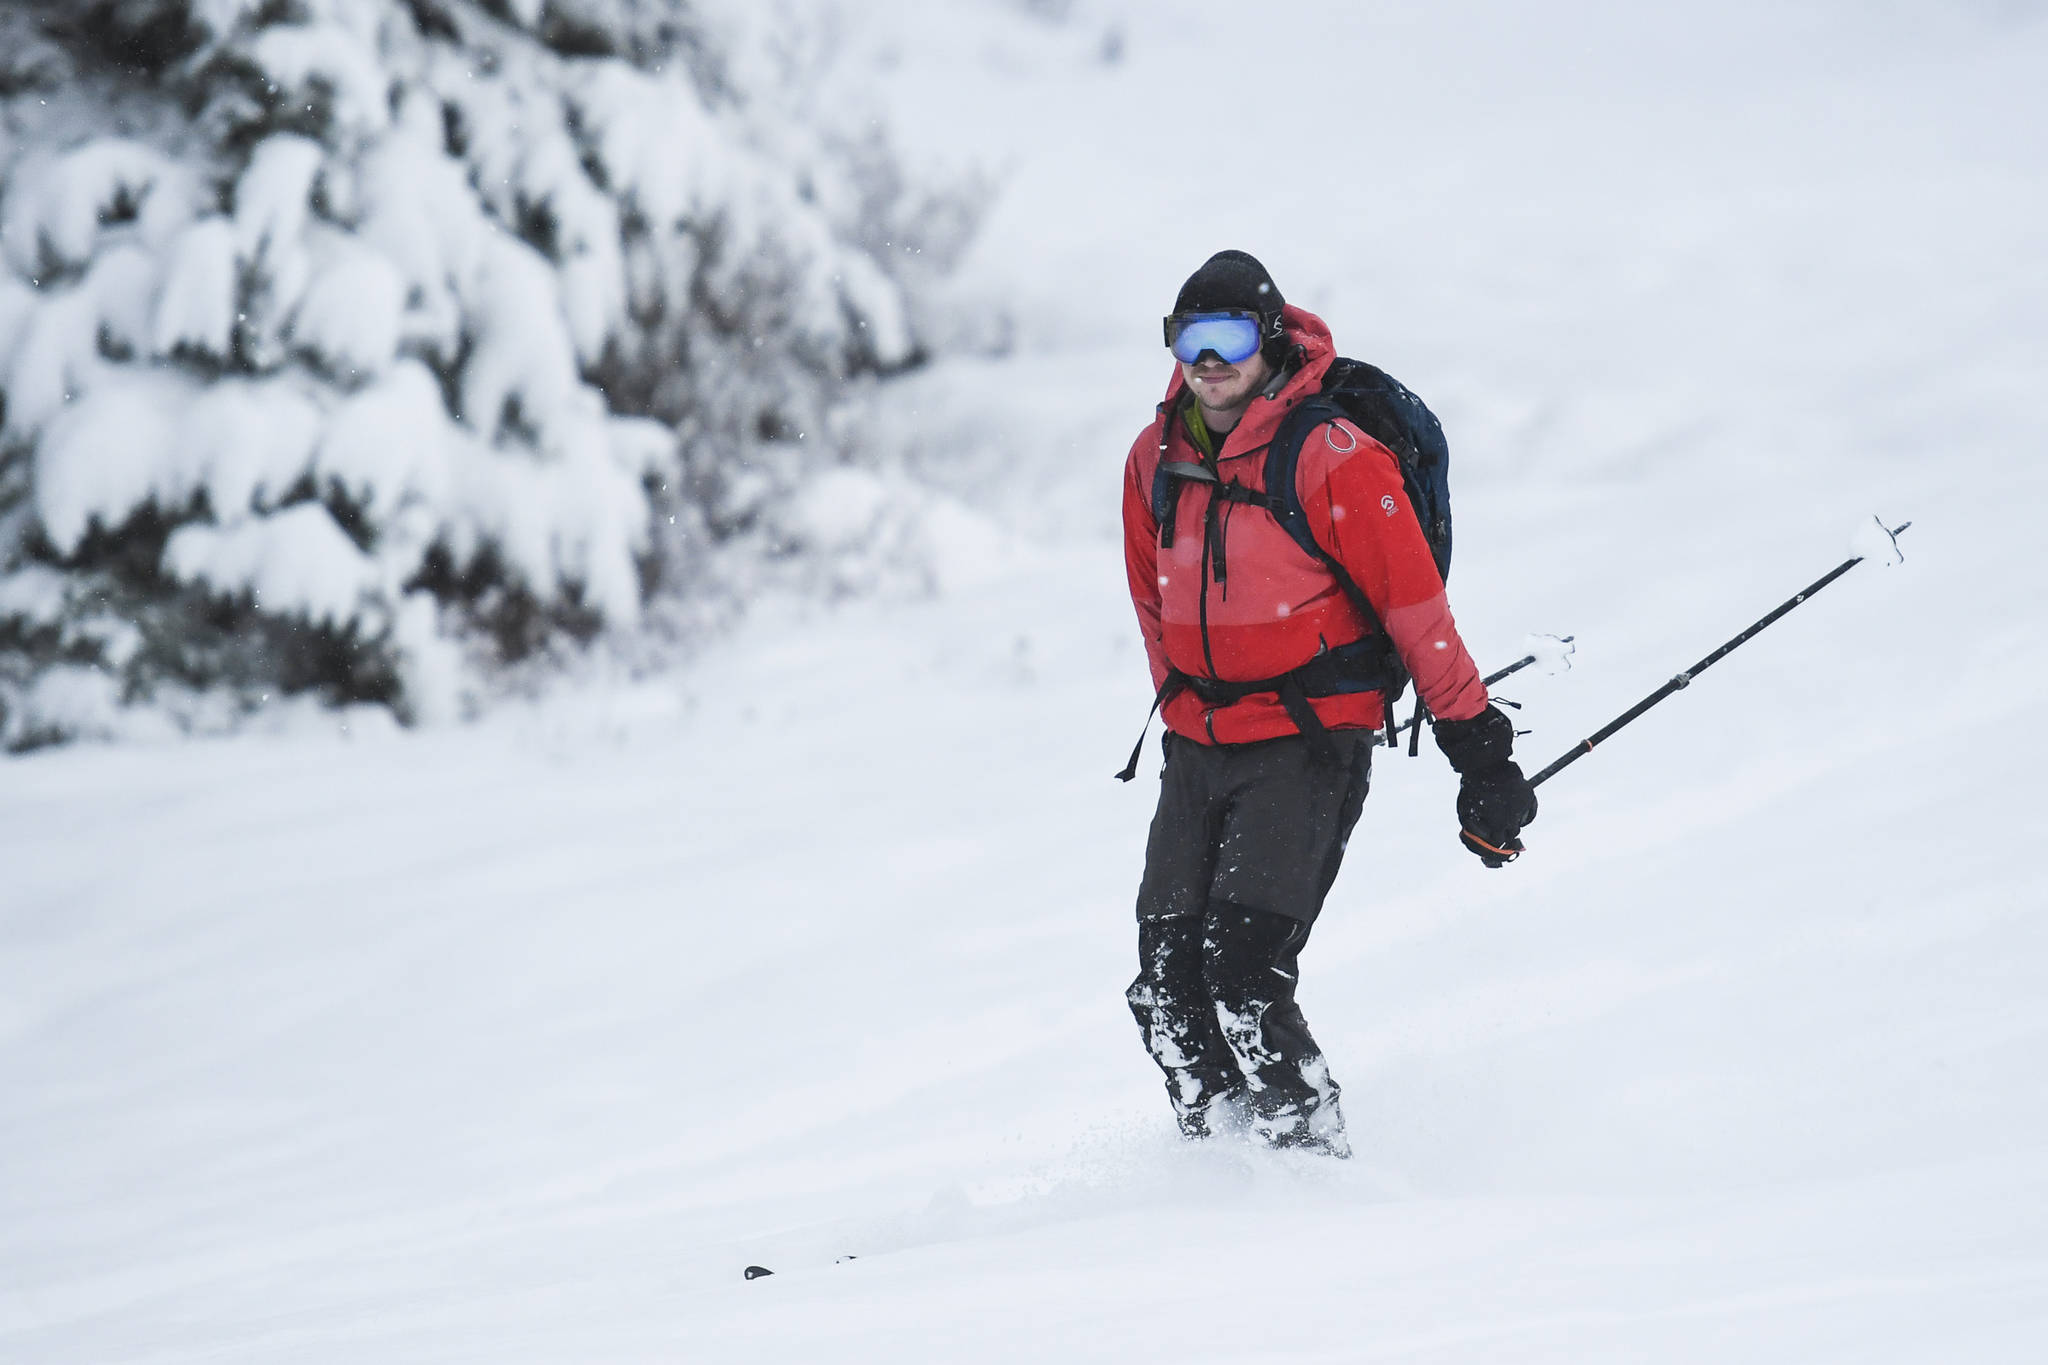 Ted Hanrahan, a ski patroller for the Eaglecrest Ski Area, makes his way down the slopes on Tuesday, Dec. 3, 2019. (Michael Penn | Juneau Empire)